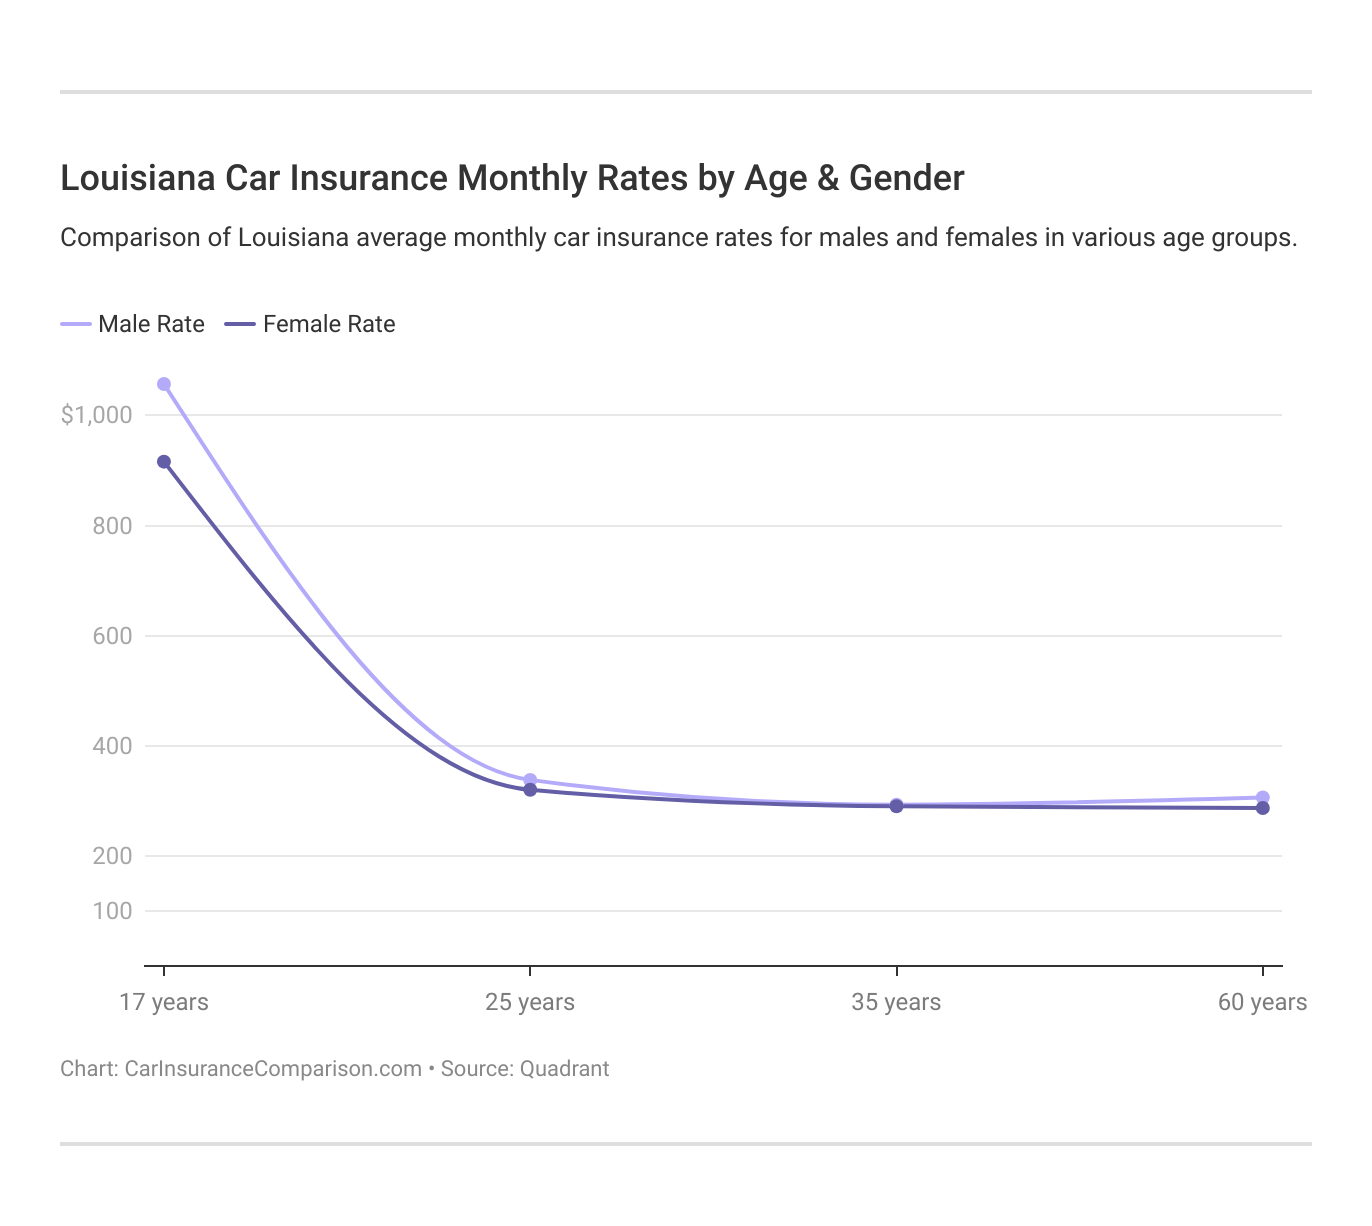 <h3>Louisiana Car Insurance Monthly Rates by Age & Gender</h3>